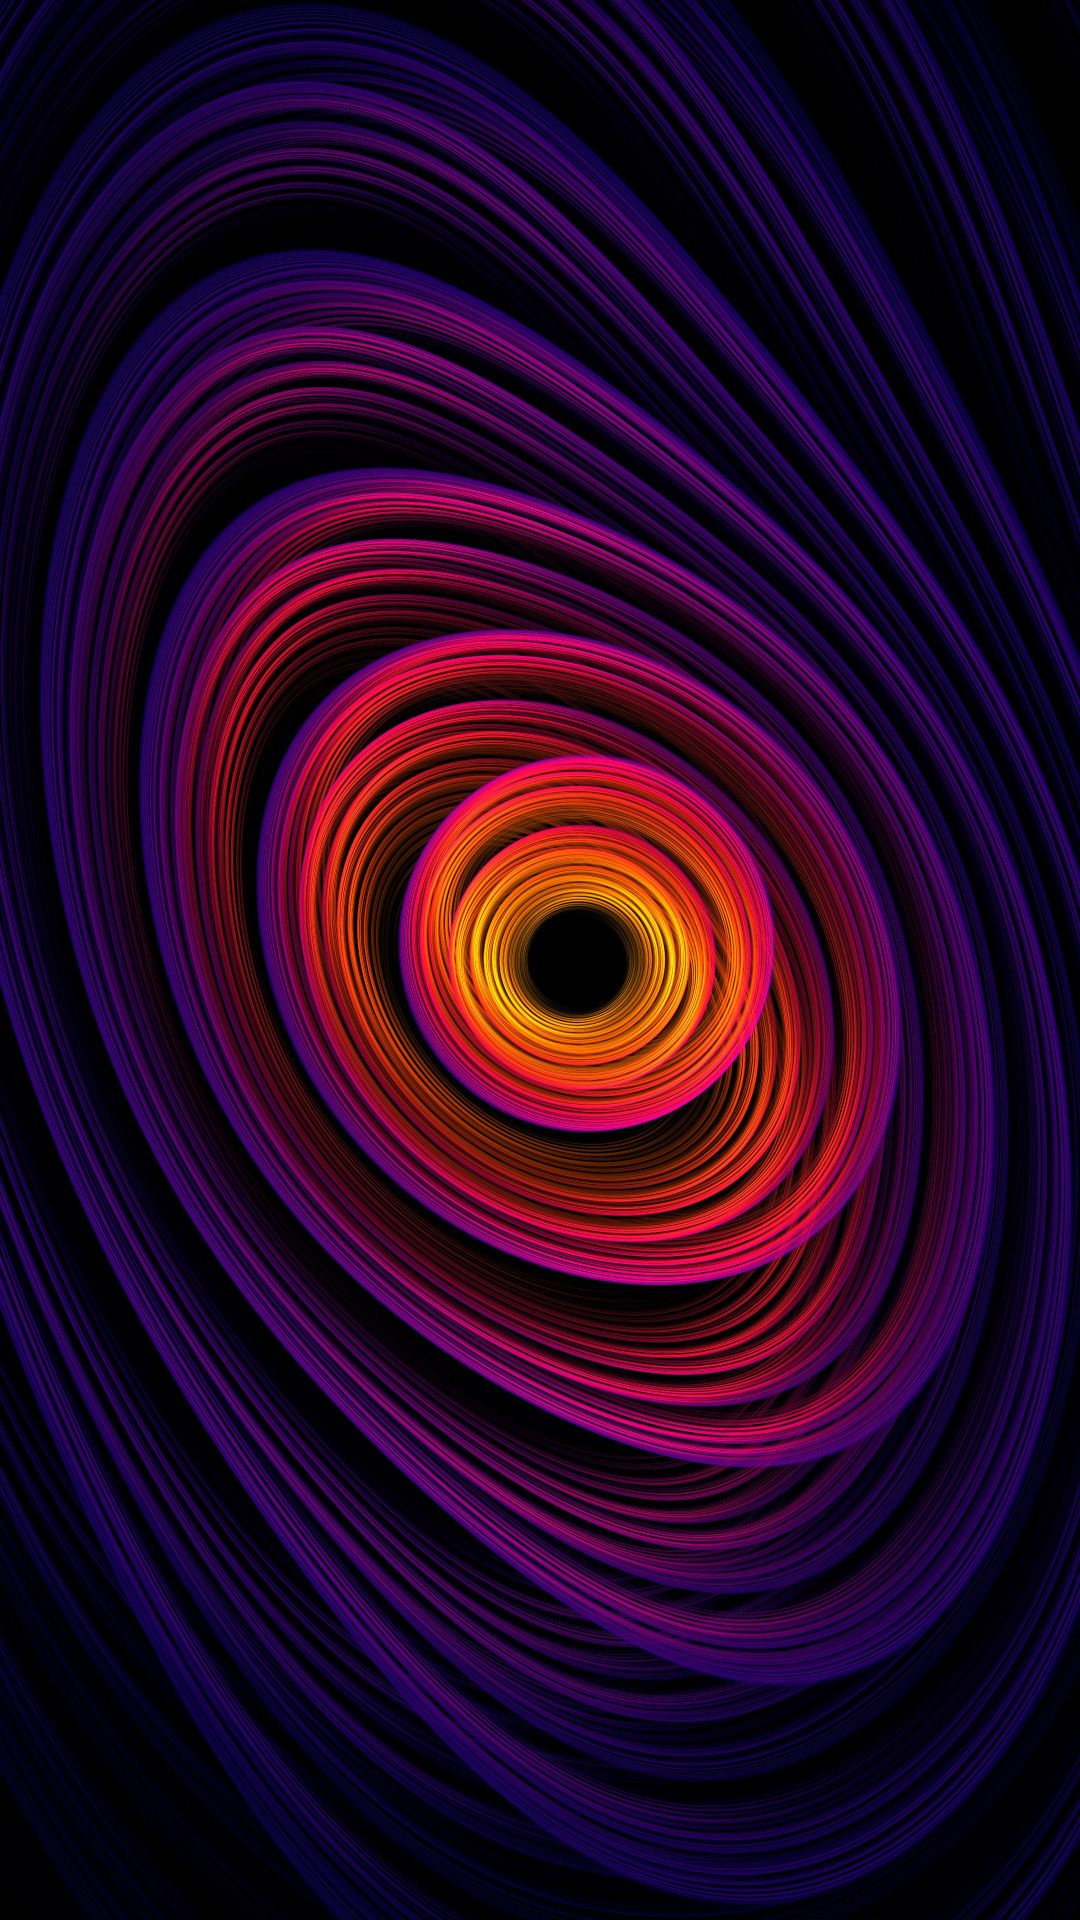 4K Spiral Shapes Purple Pink Abstract Wallpapers